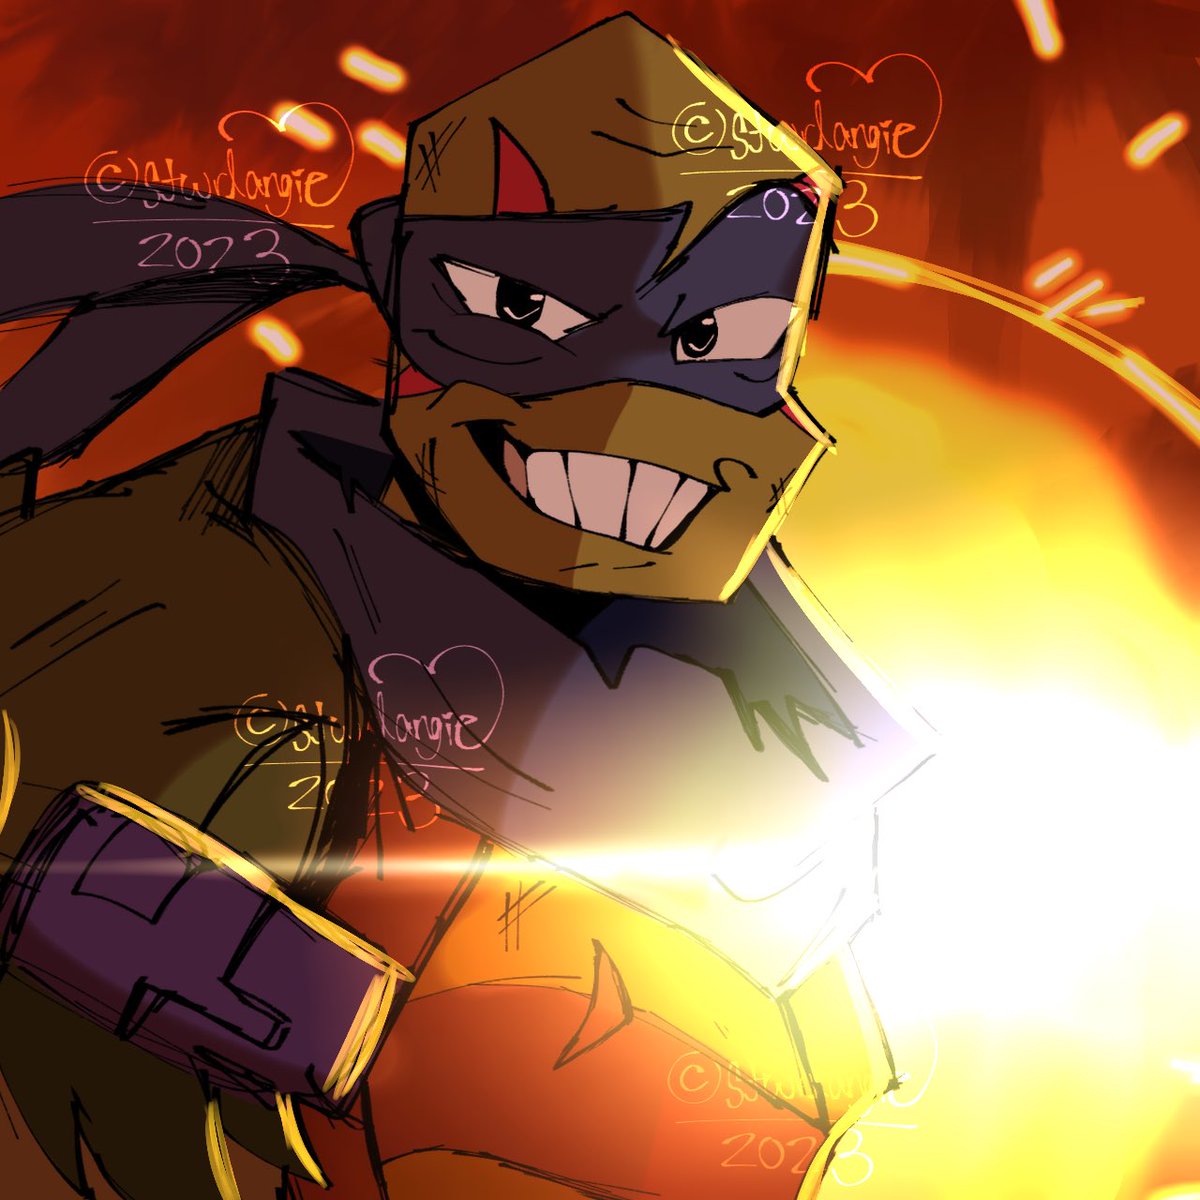 'everytime, my fate is at the hands of my mistakes, and that's alright.'

f!leo redraw from the movie bc i miss him and he deserved sm better :-(
#ROTTMNT #RiseoftheTMNT #Leo #SaveRiseoftheTMNT #UnpauseRiseoftheTMNT #ROTTMNTMovie #RiseoftheTMNTMovie